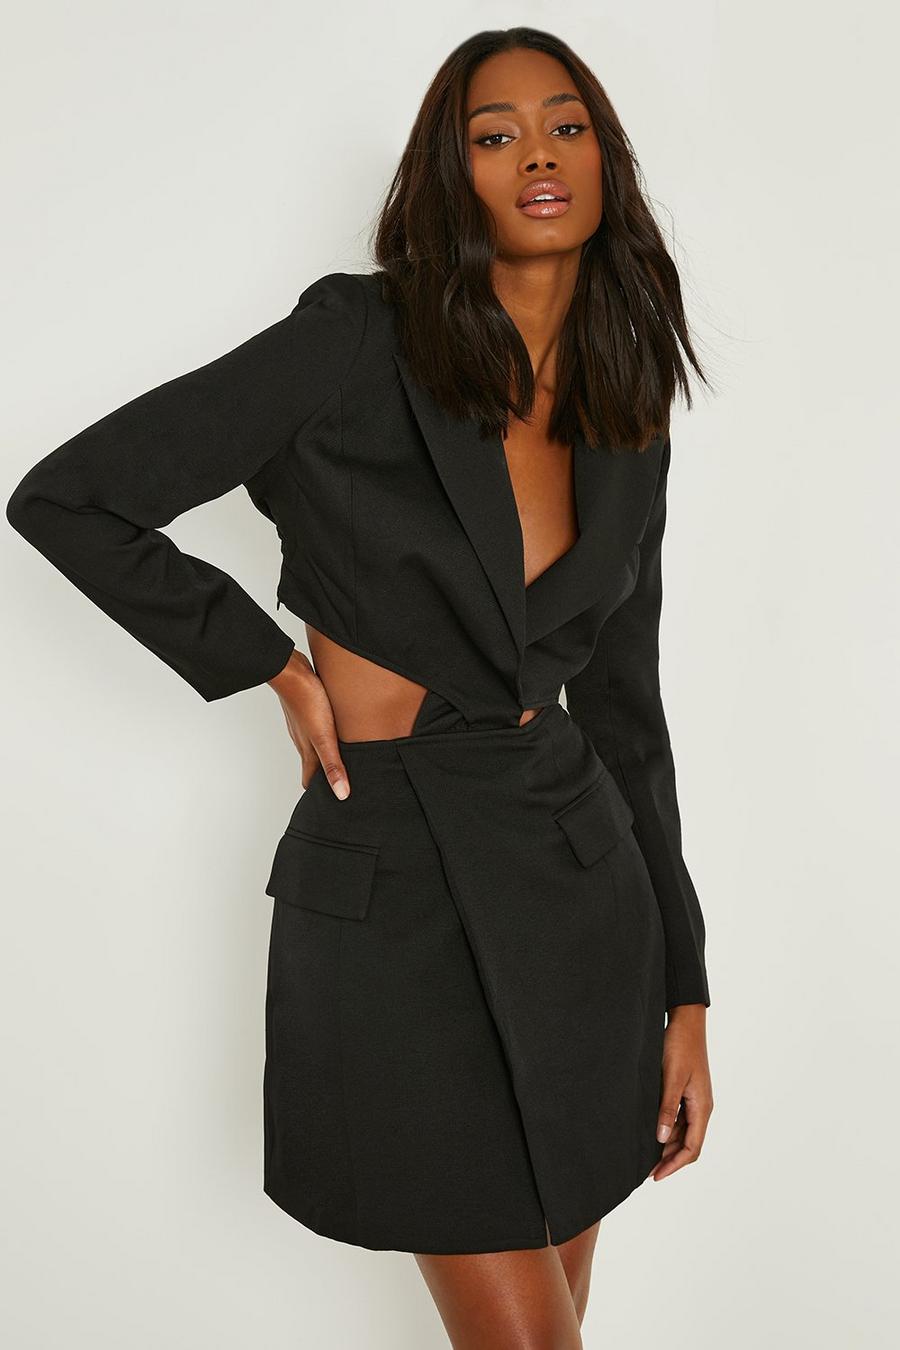 Crystal Knot Backless Single Breasted Tailored Blazer Mini Dress